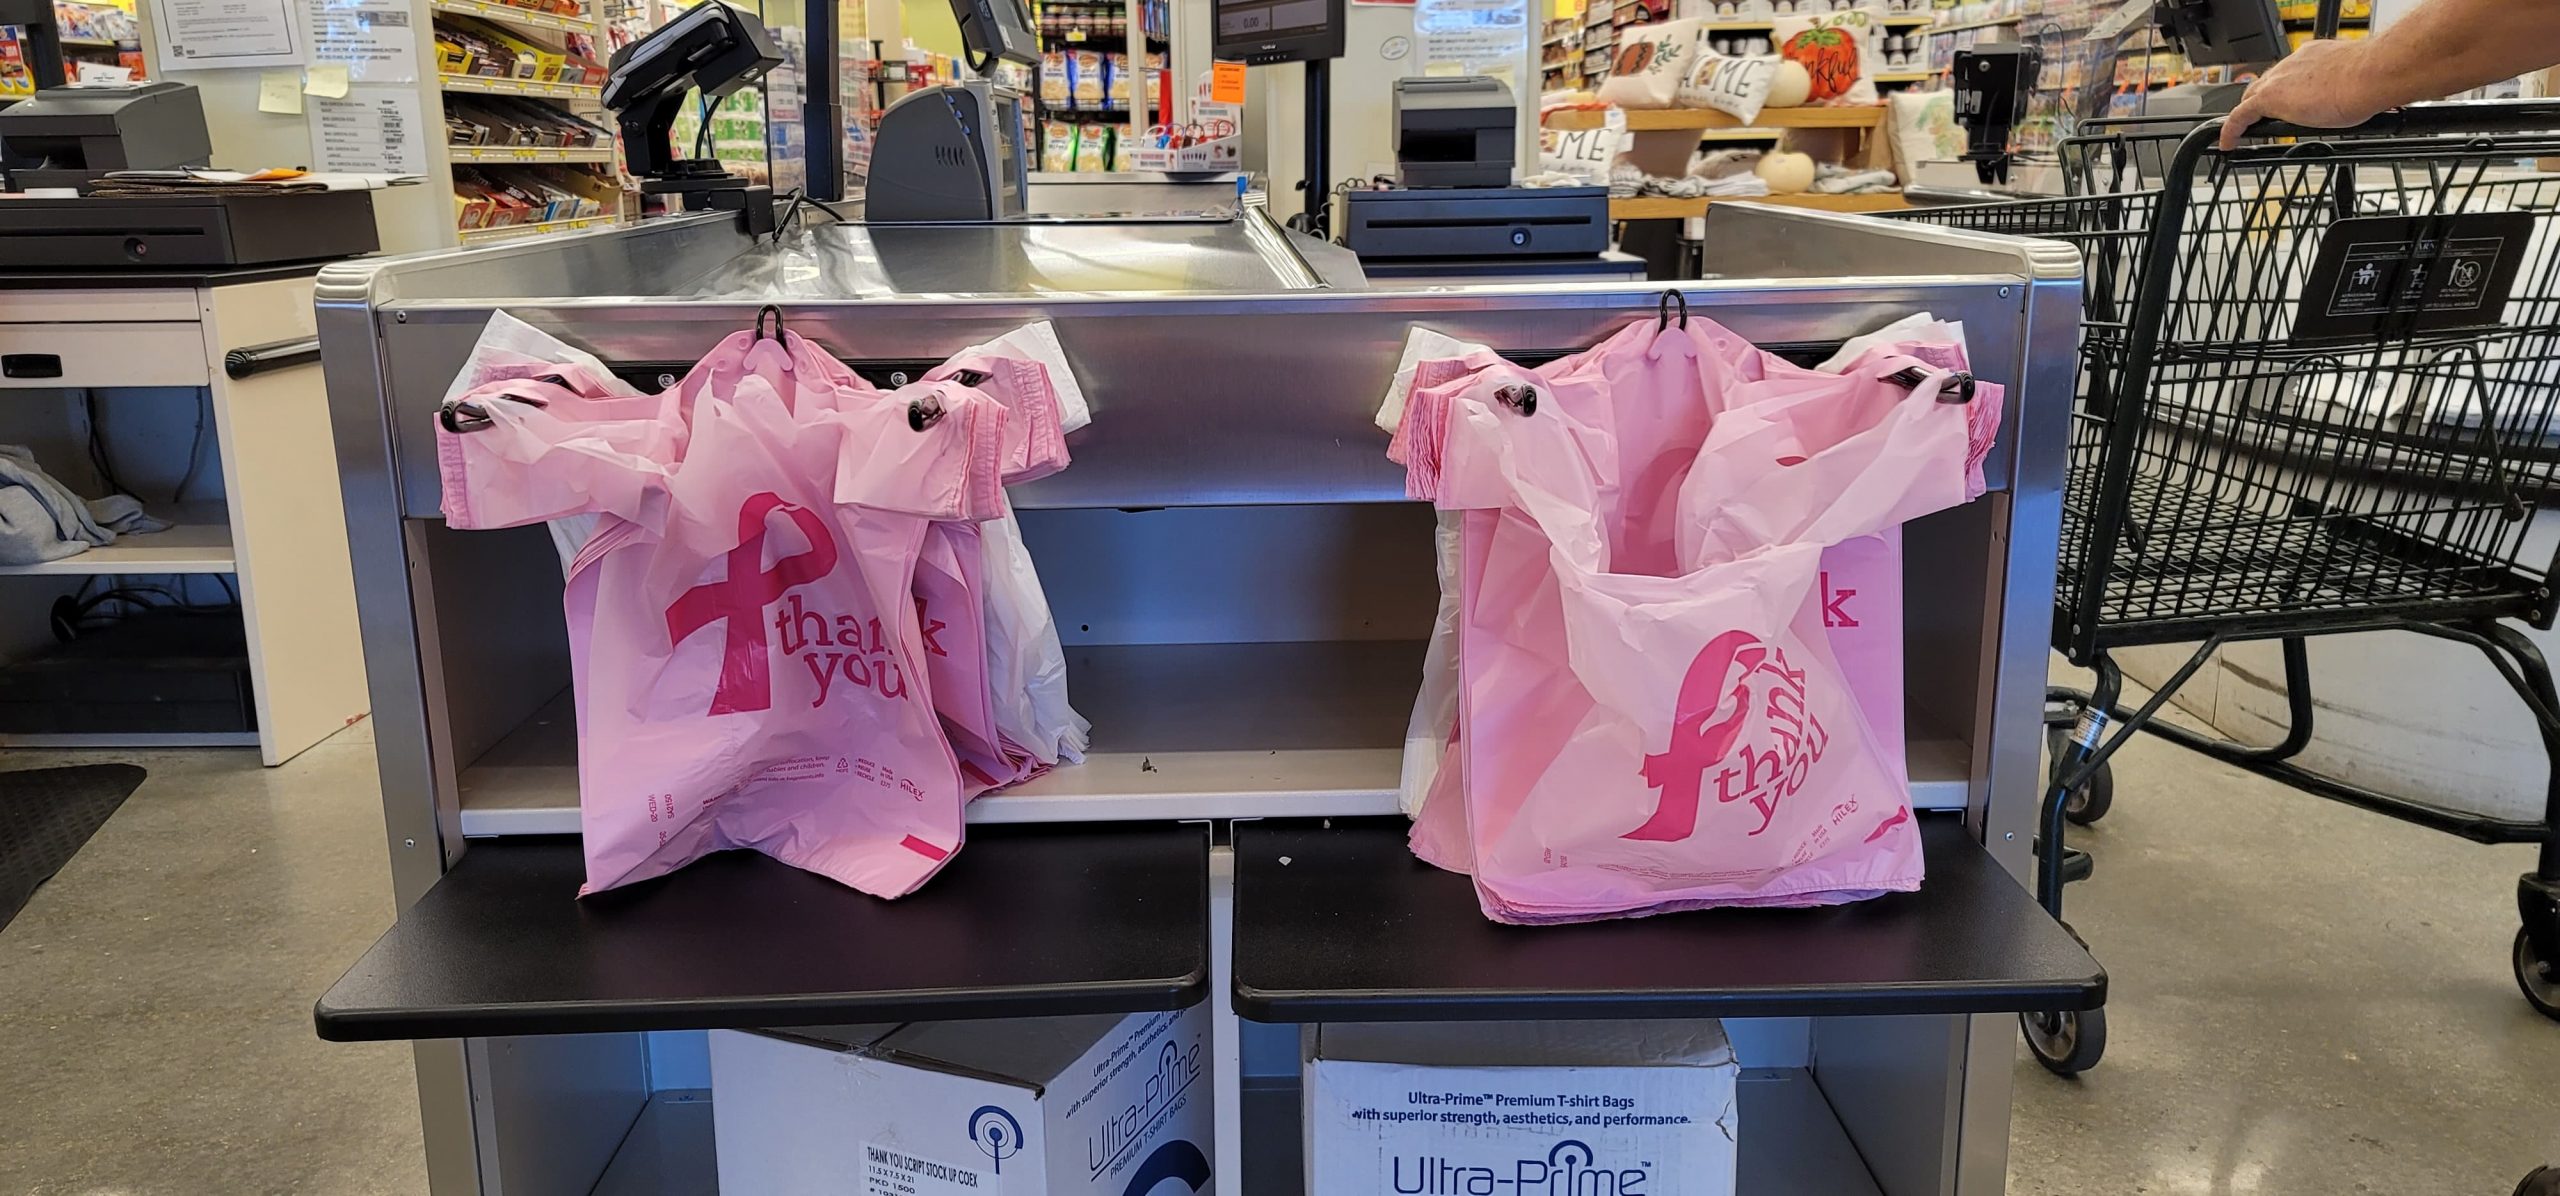 Piggly Wiggly in Clay participating in Breast Cancer Awareness Month